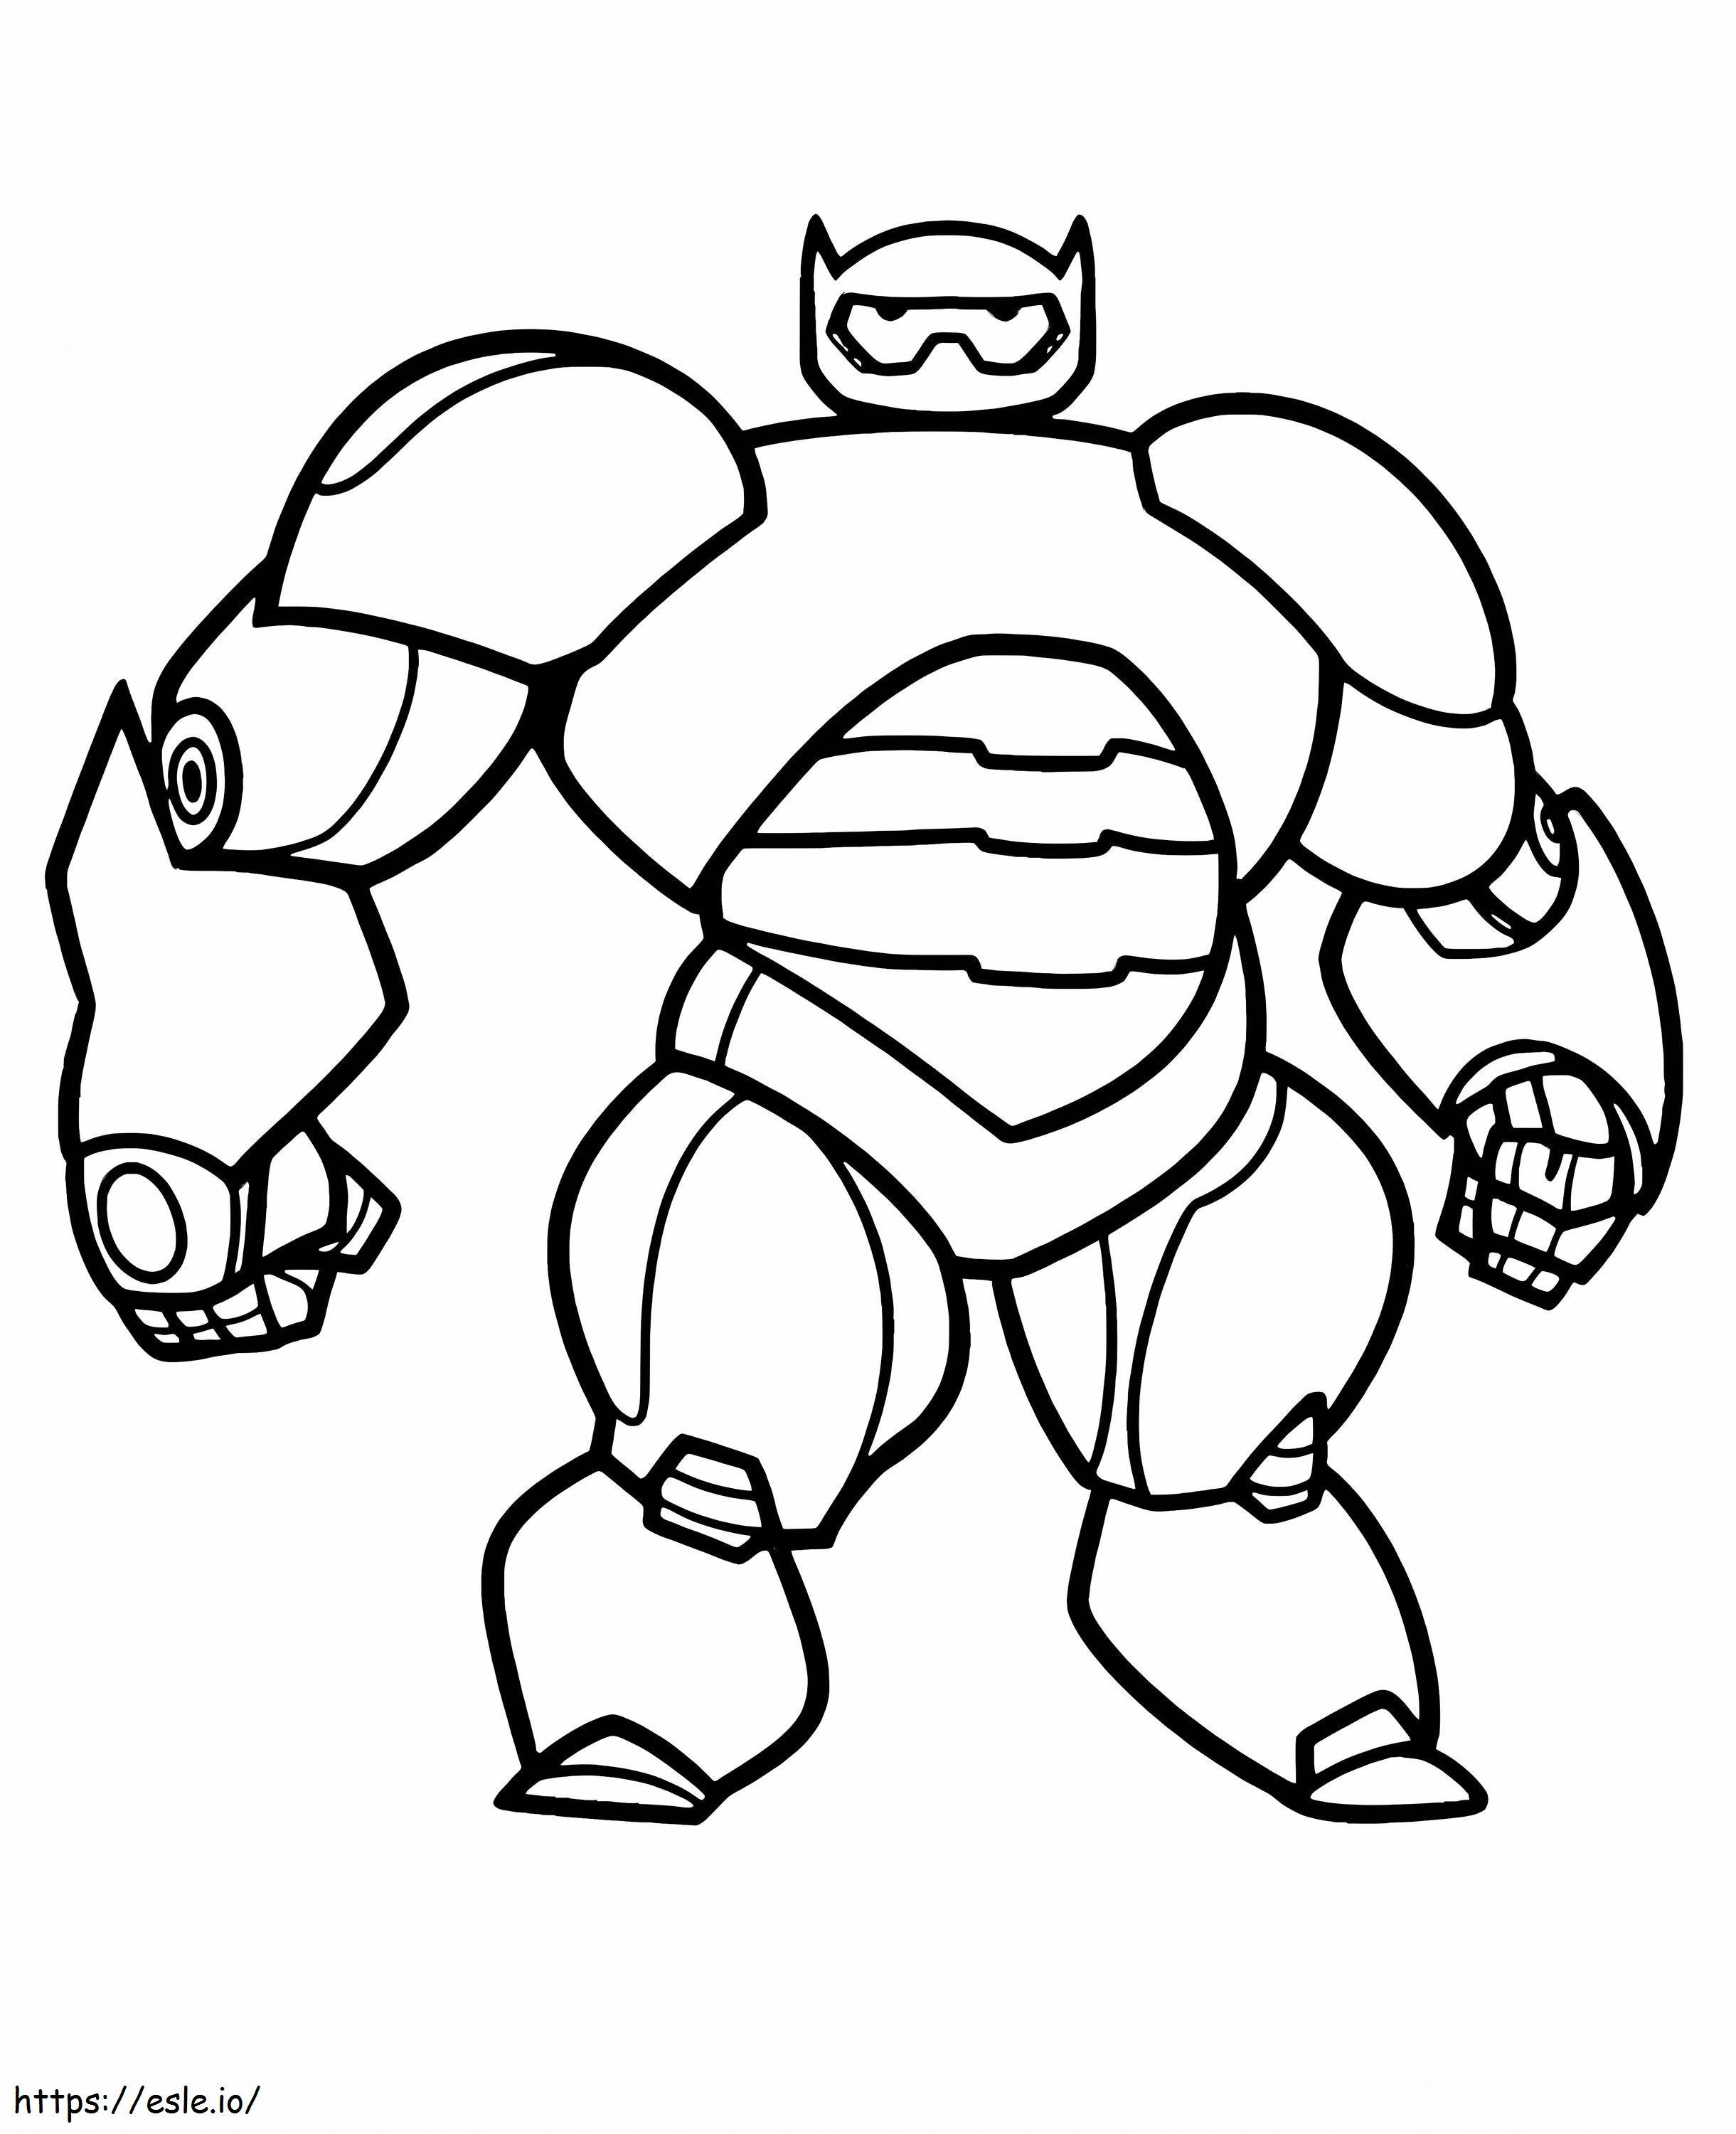 Next Generation Robot coloring page